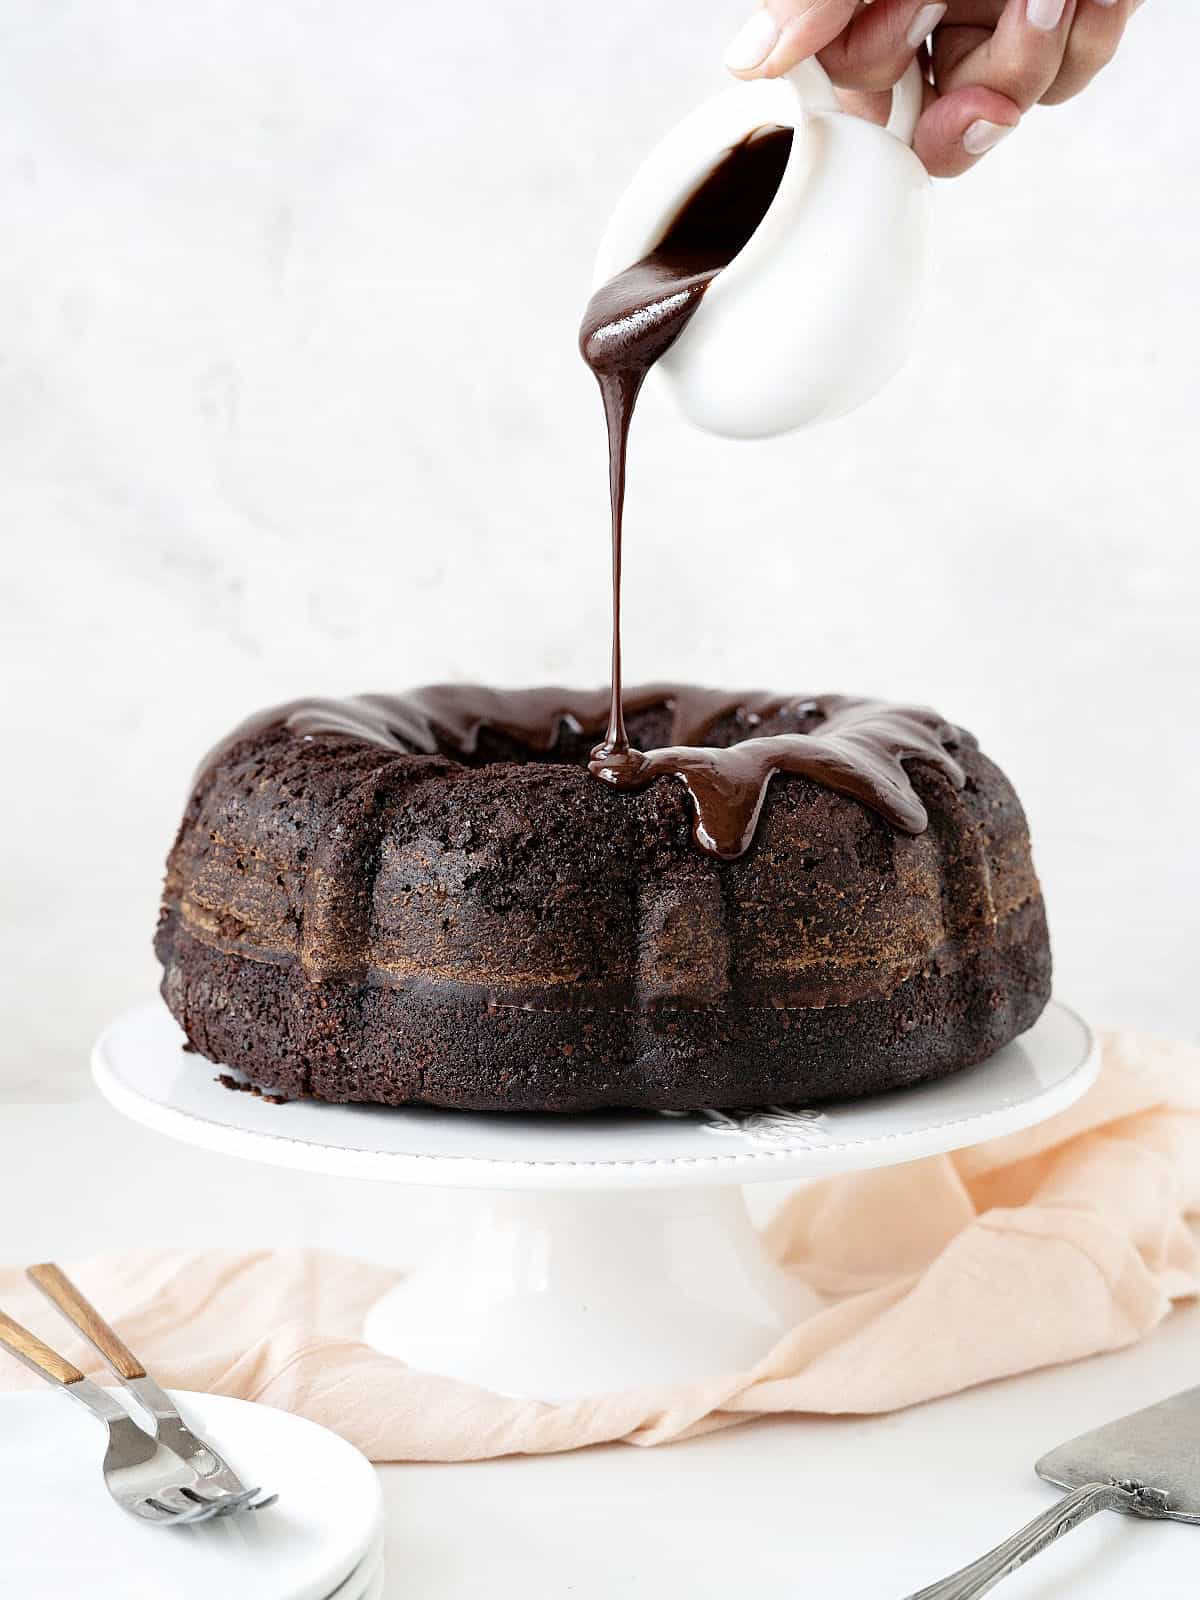 Pouring chocolate ganache from a white sauce boat on a chocolate bundt cake on a white cake stand. Pink cloth underneath, grey background. 